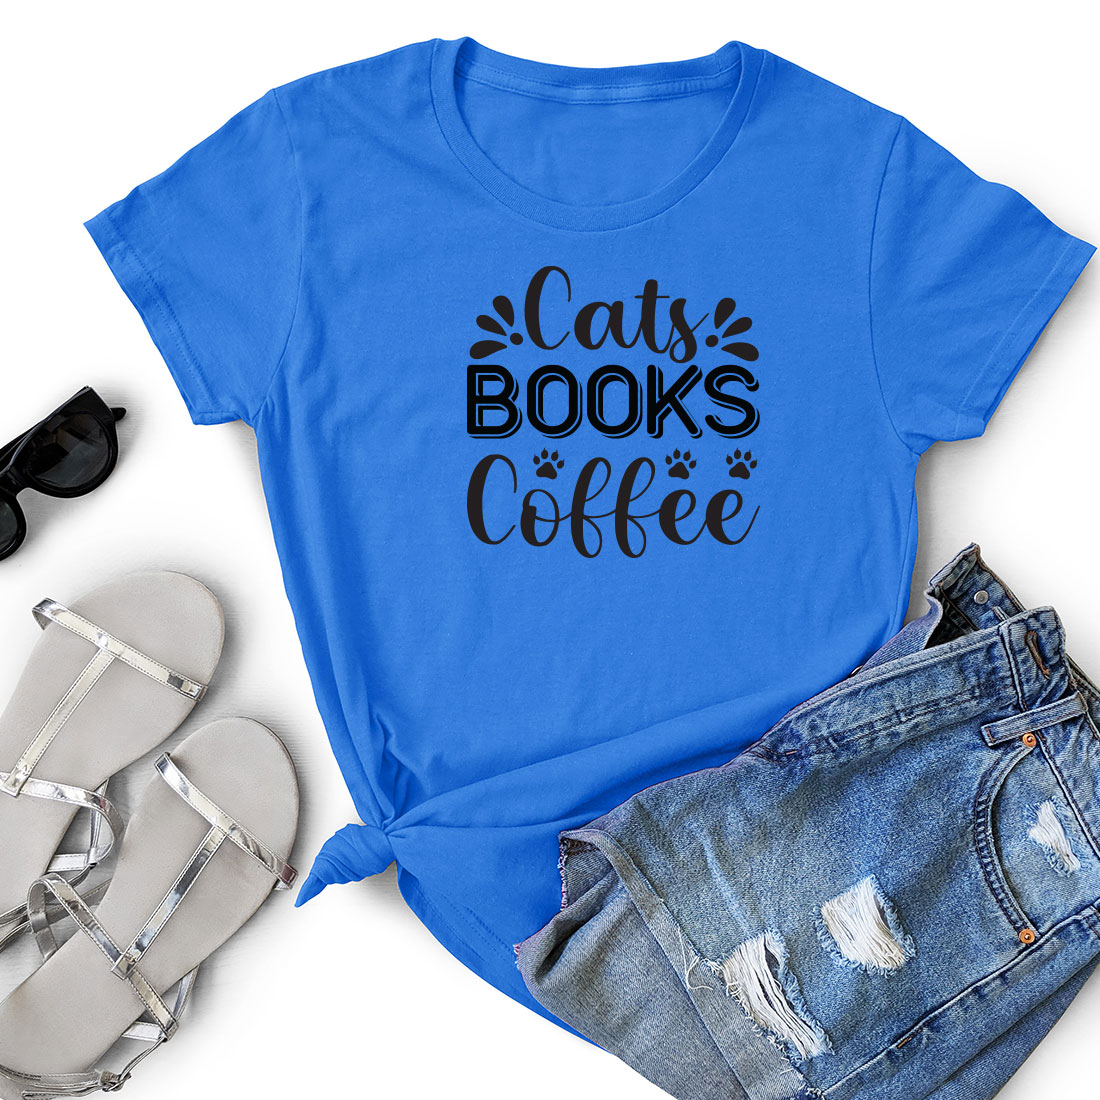 T - shirt that says cats books coffee.